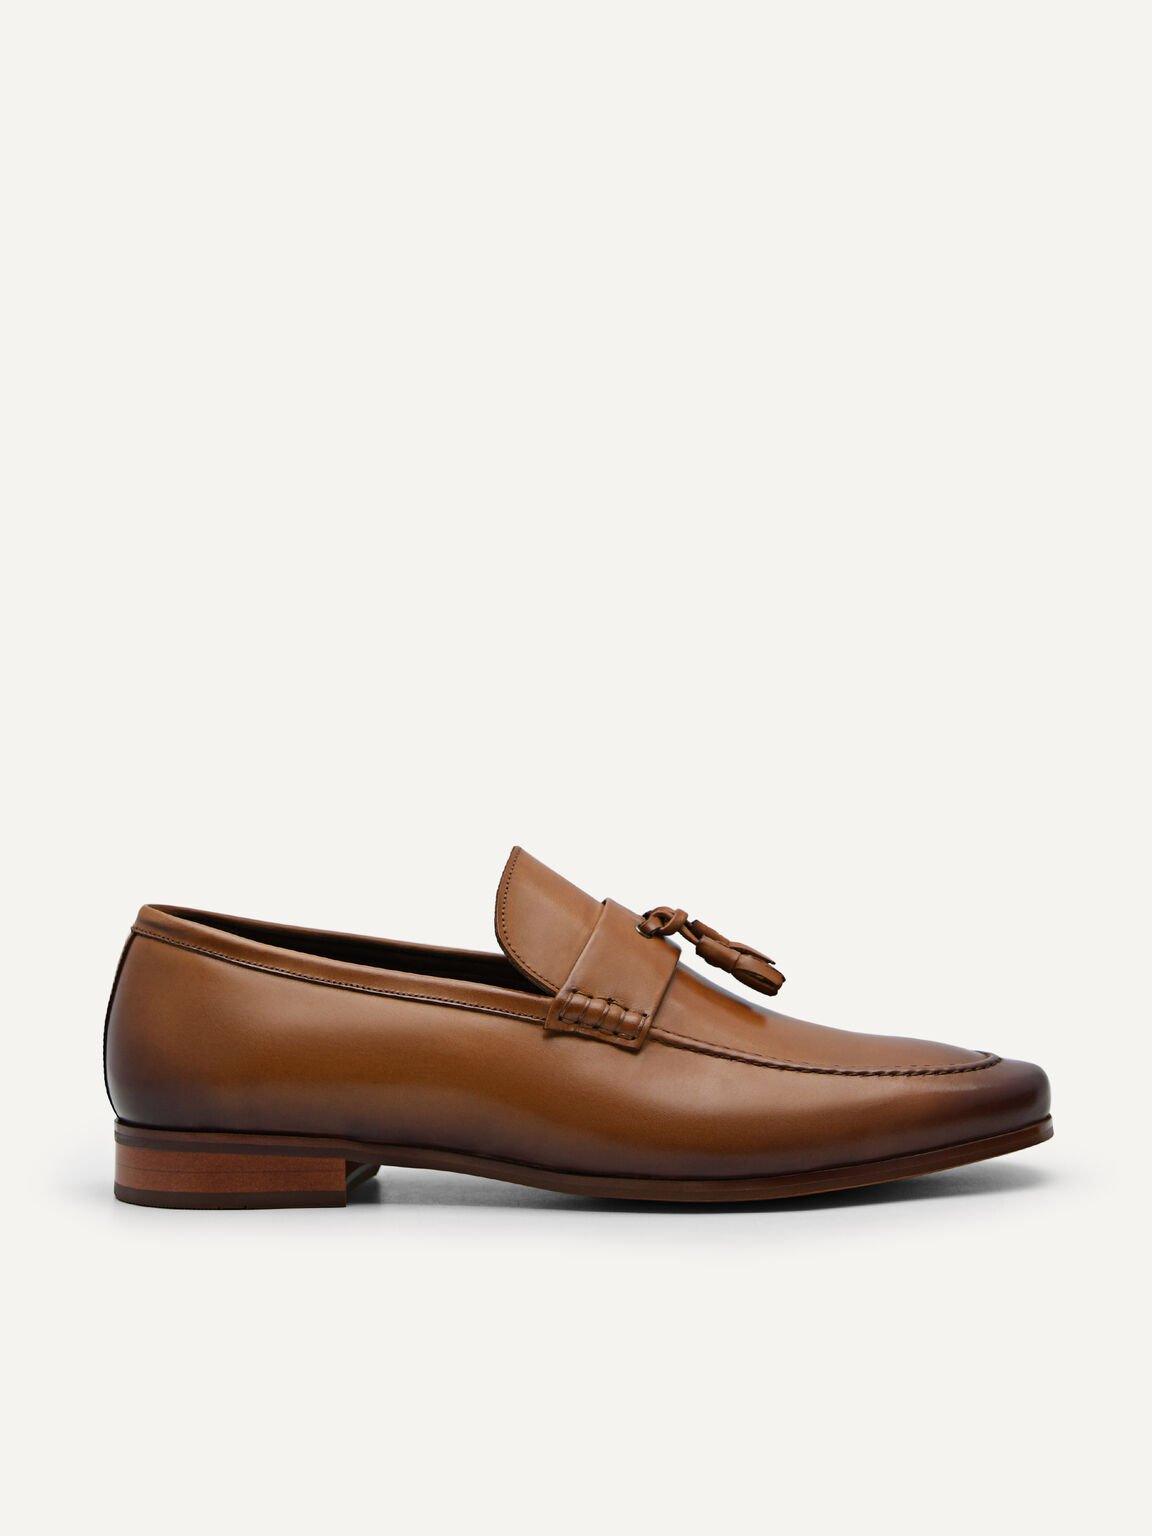 Penny Loafers with Tassels, Camel